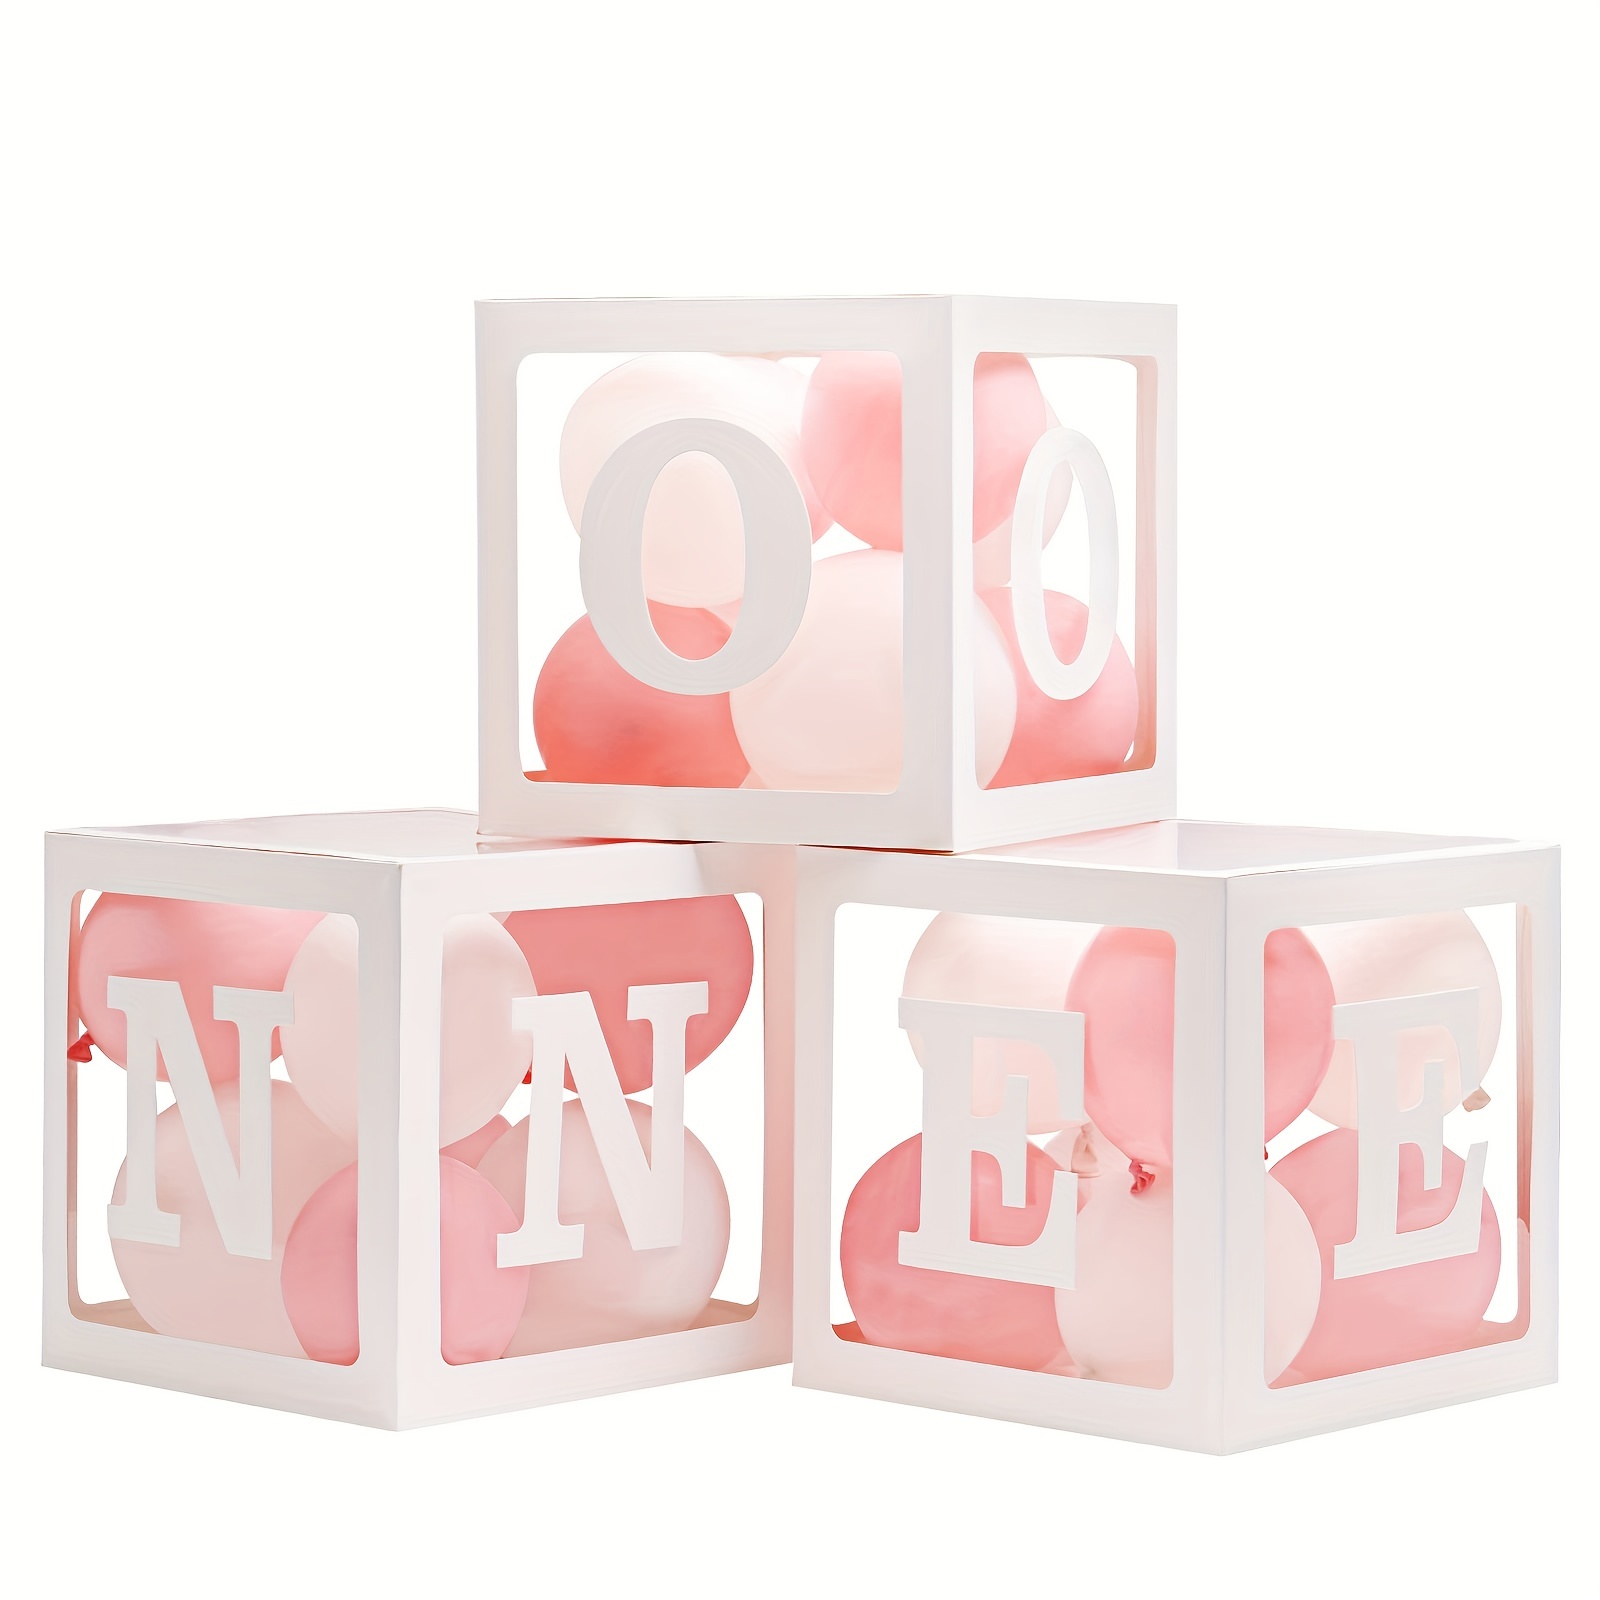 1st Birthday Balloon 'One' Boxes for 1 Year Old with 24 Balloons - Baby First Birthday Decorations Clear Cube Blocks 'One' Letters As Cake Smash